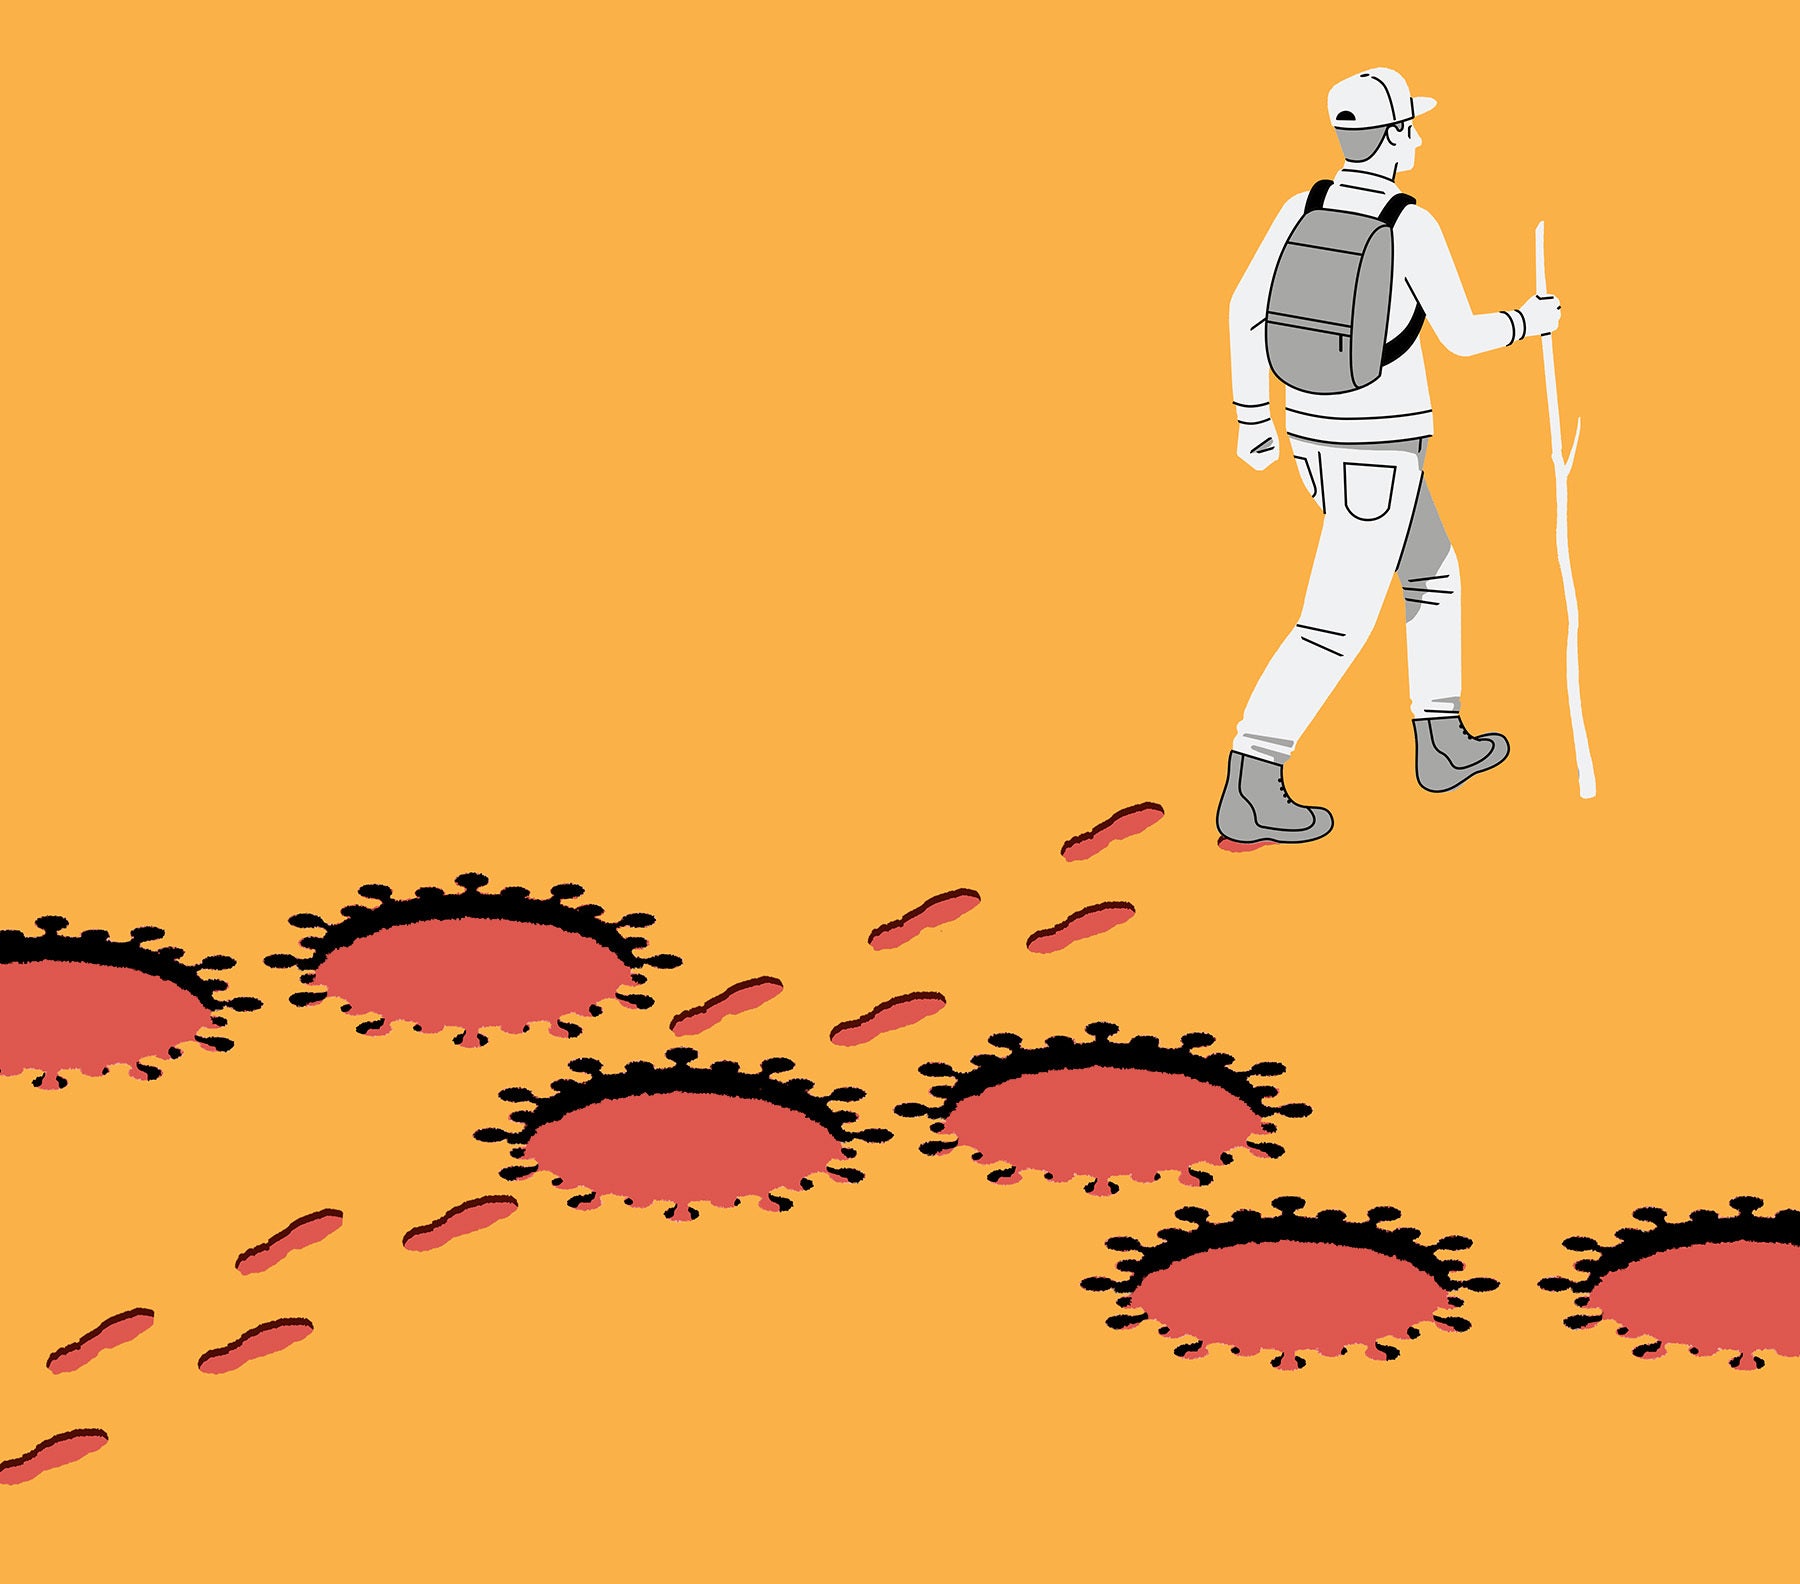 Illustration of a person hiking across a field of covid-19 shaped craters